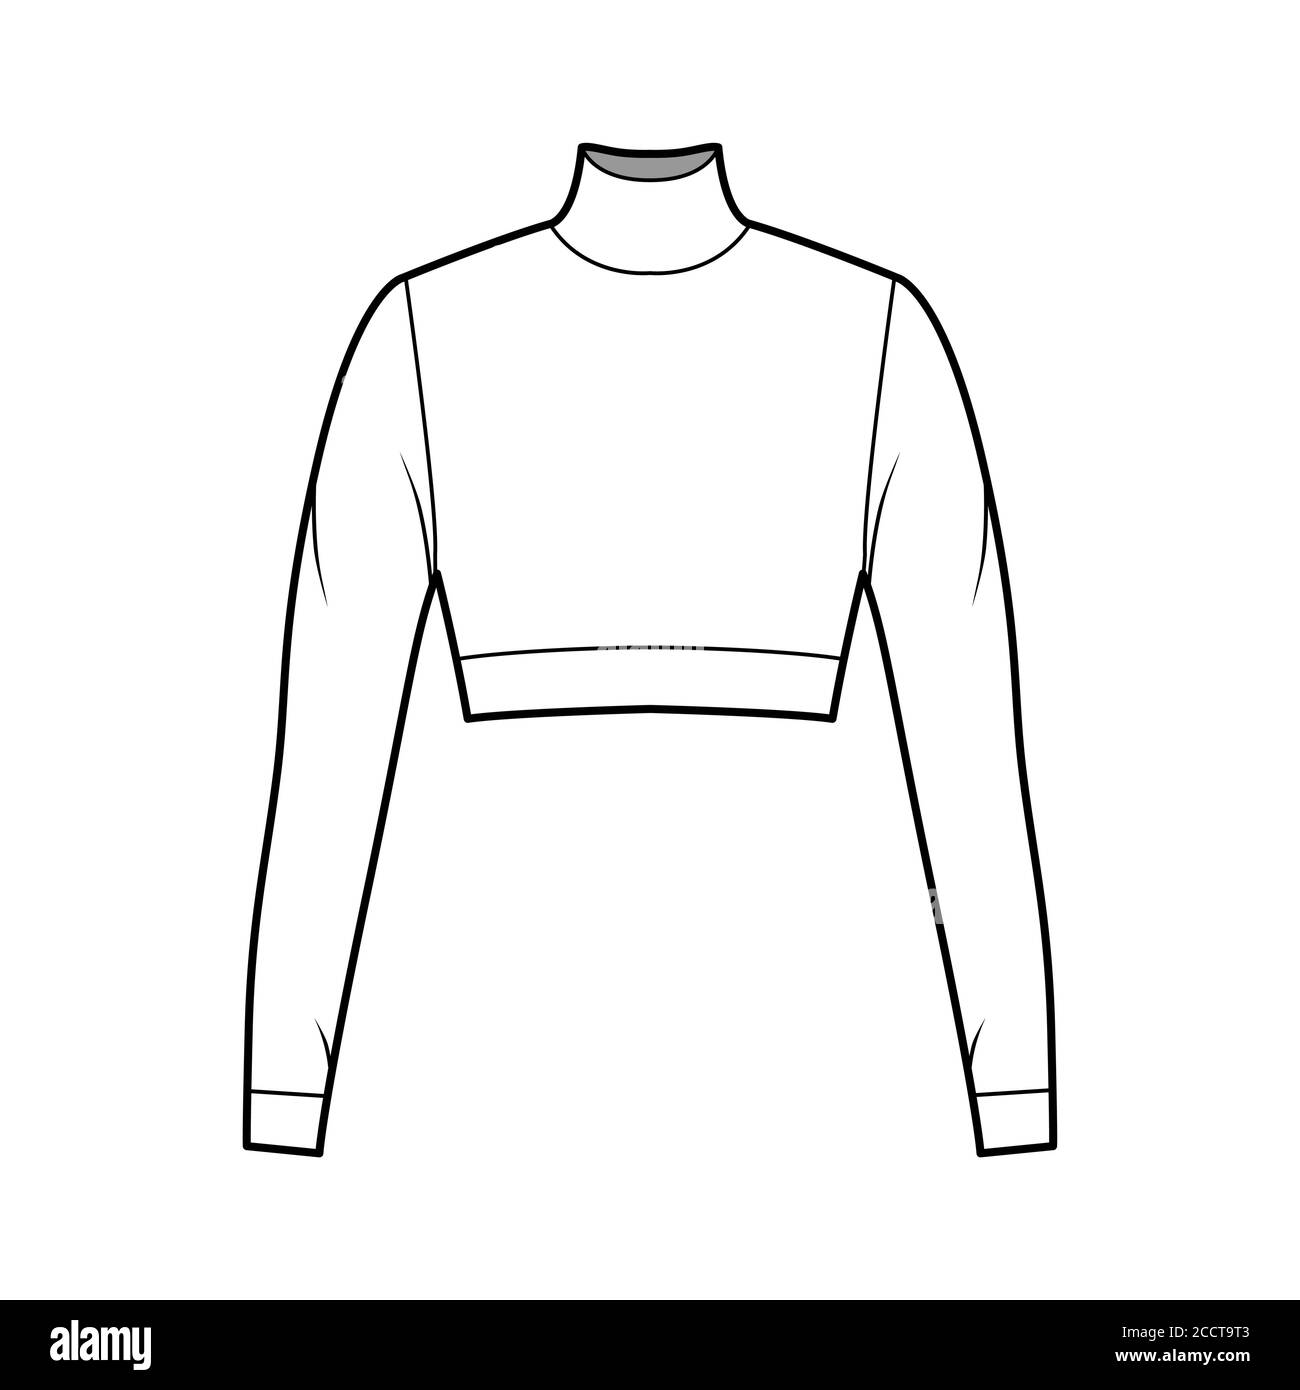 Cropped turtleneck jersey sweater technical fashion illustration with long sleeves, close-fitting shape. Flat outwear jumper apparel template front white color. Women men unisex shirt top CAD mockup Stock Vector